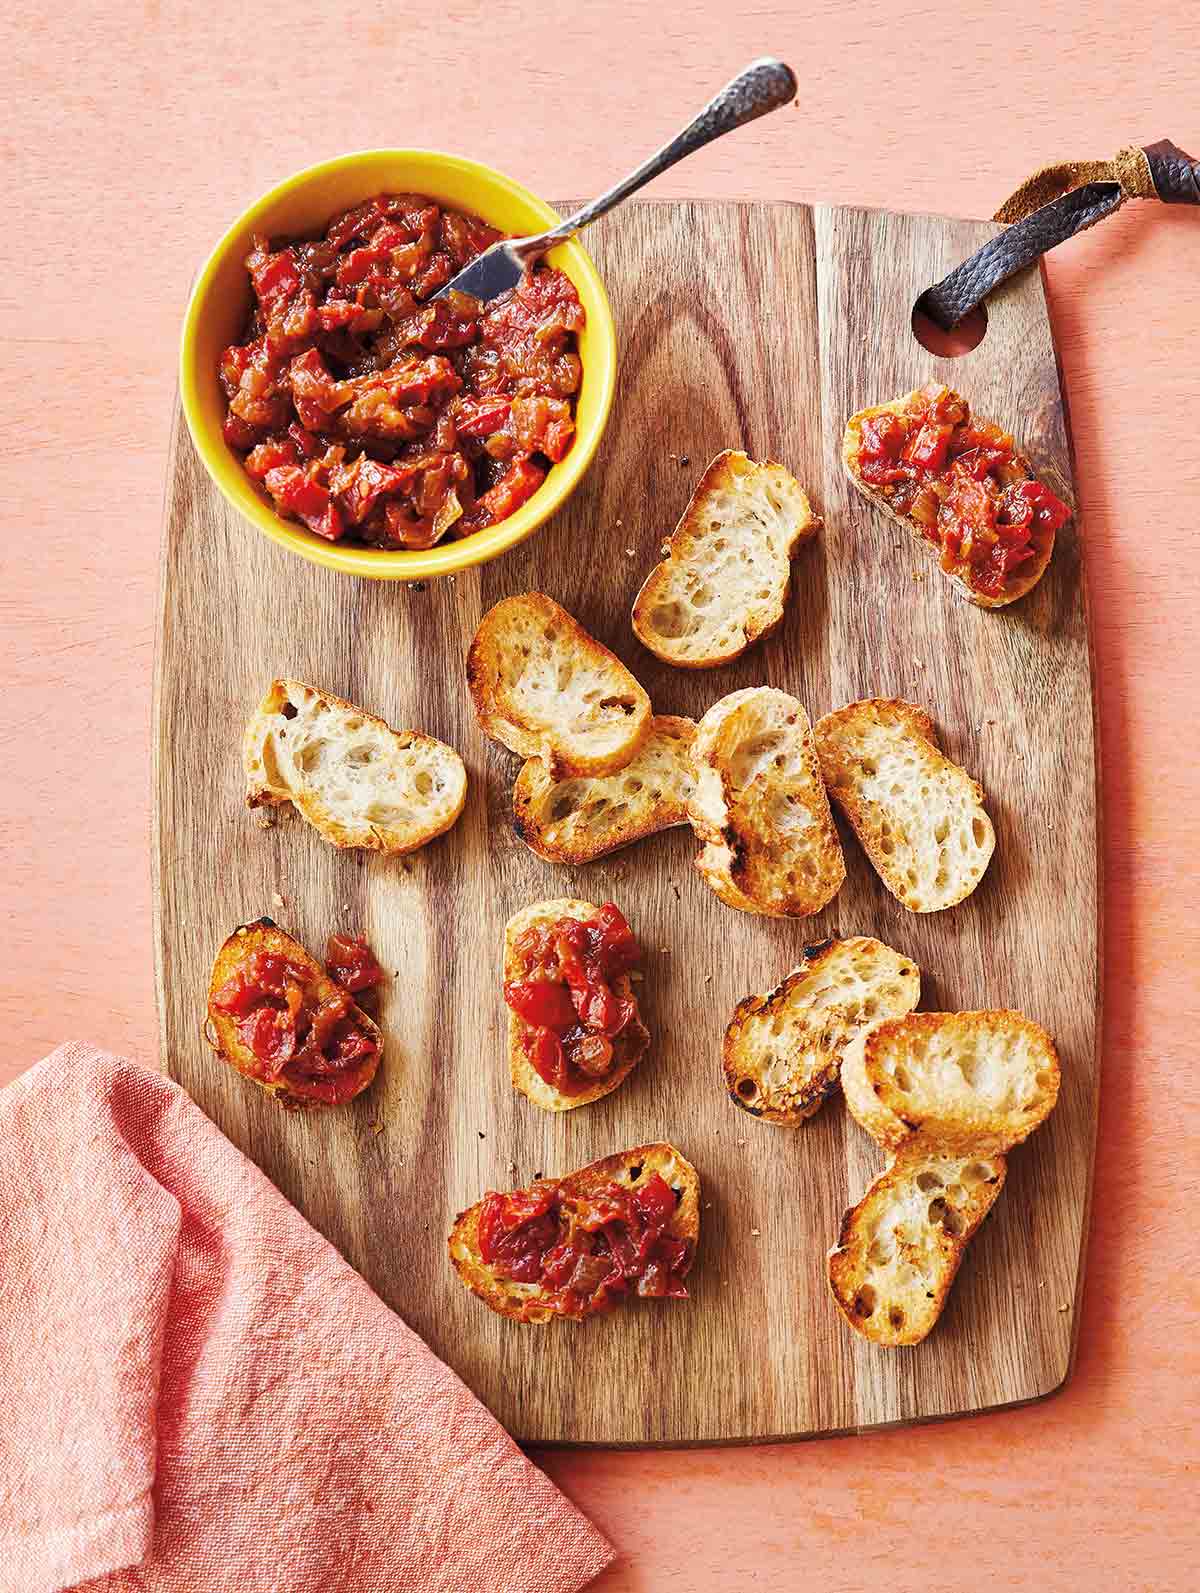 A wooden cutting board with a bowl of caramelized onion and tomato jam and several toasted baguette slices on it.